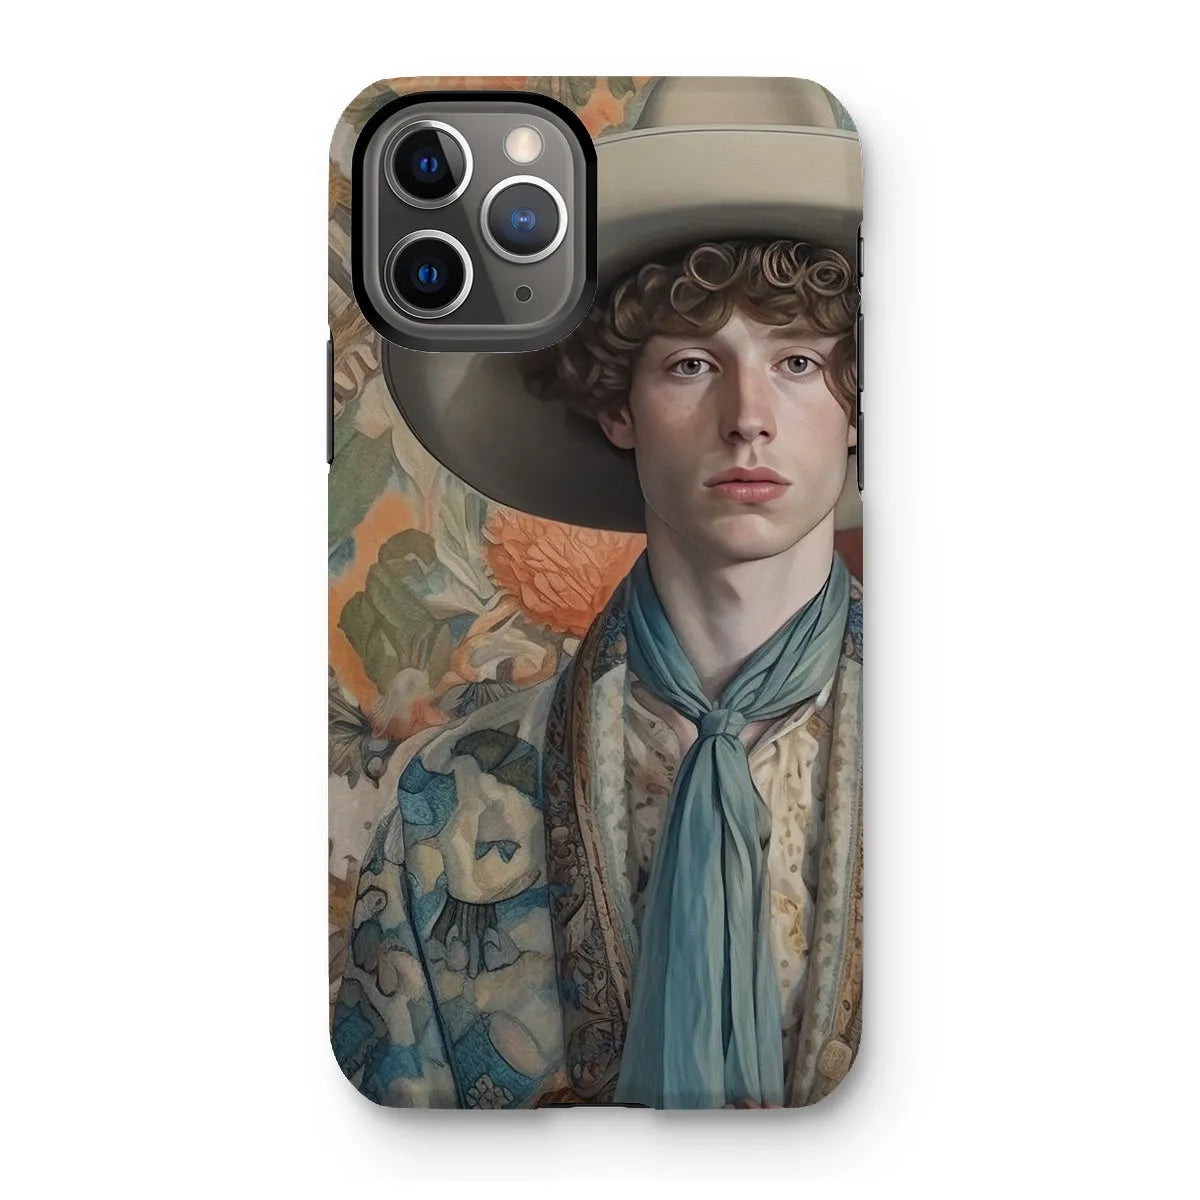 Theodore The Gay Cowboy - Dandy Gay Men Art Phone Case - Iphone 11 Pro / Matte - Mobile Phone Cases - Aesthetic Art